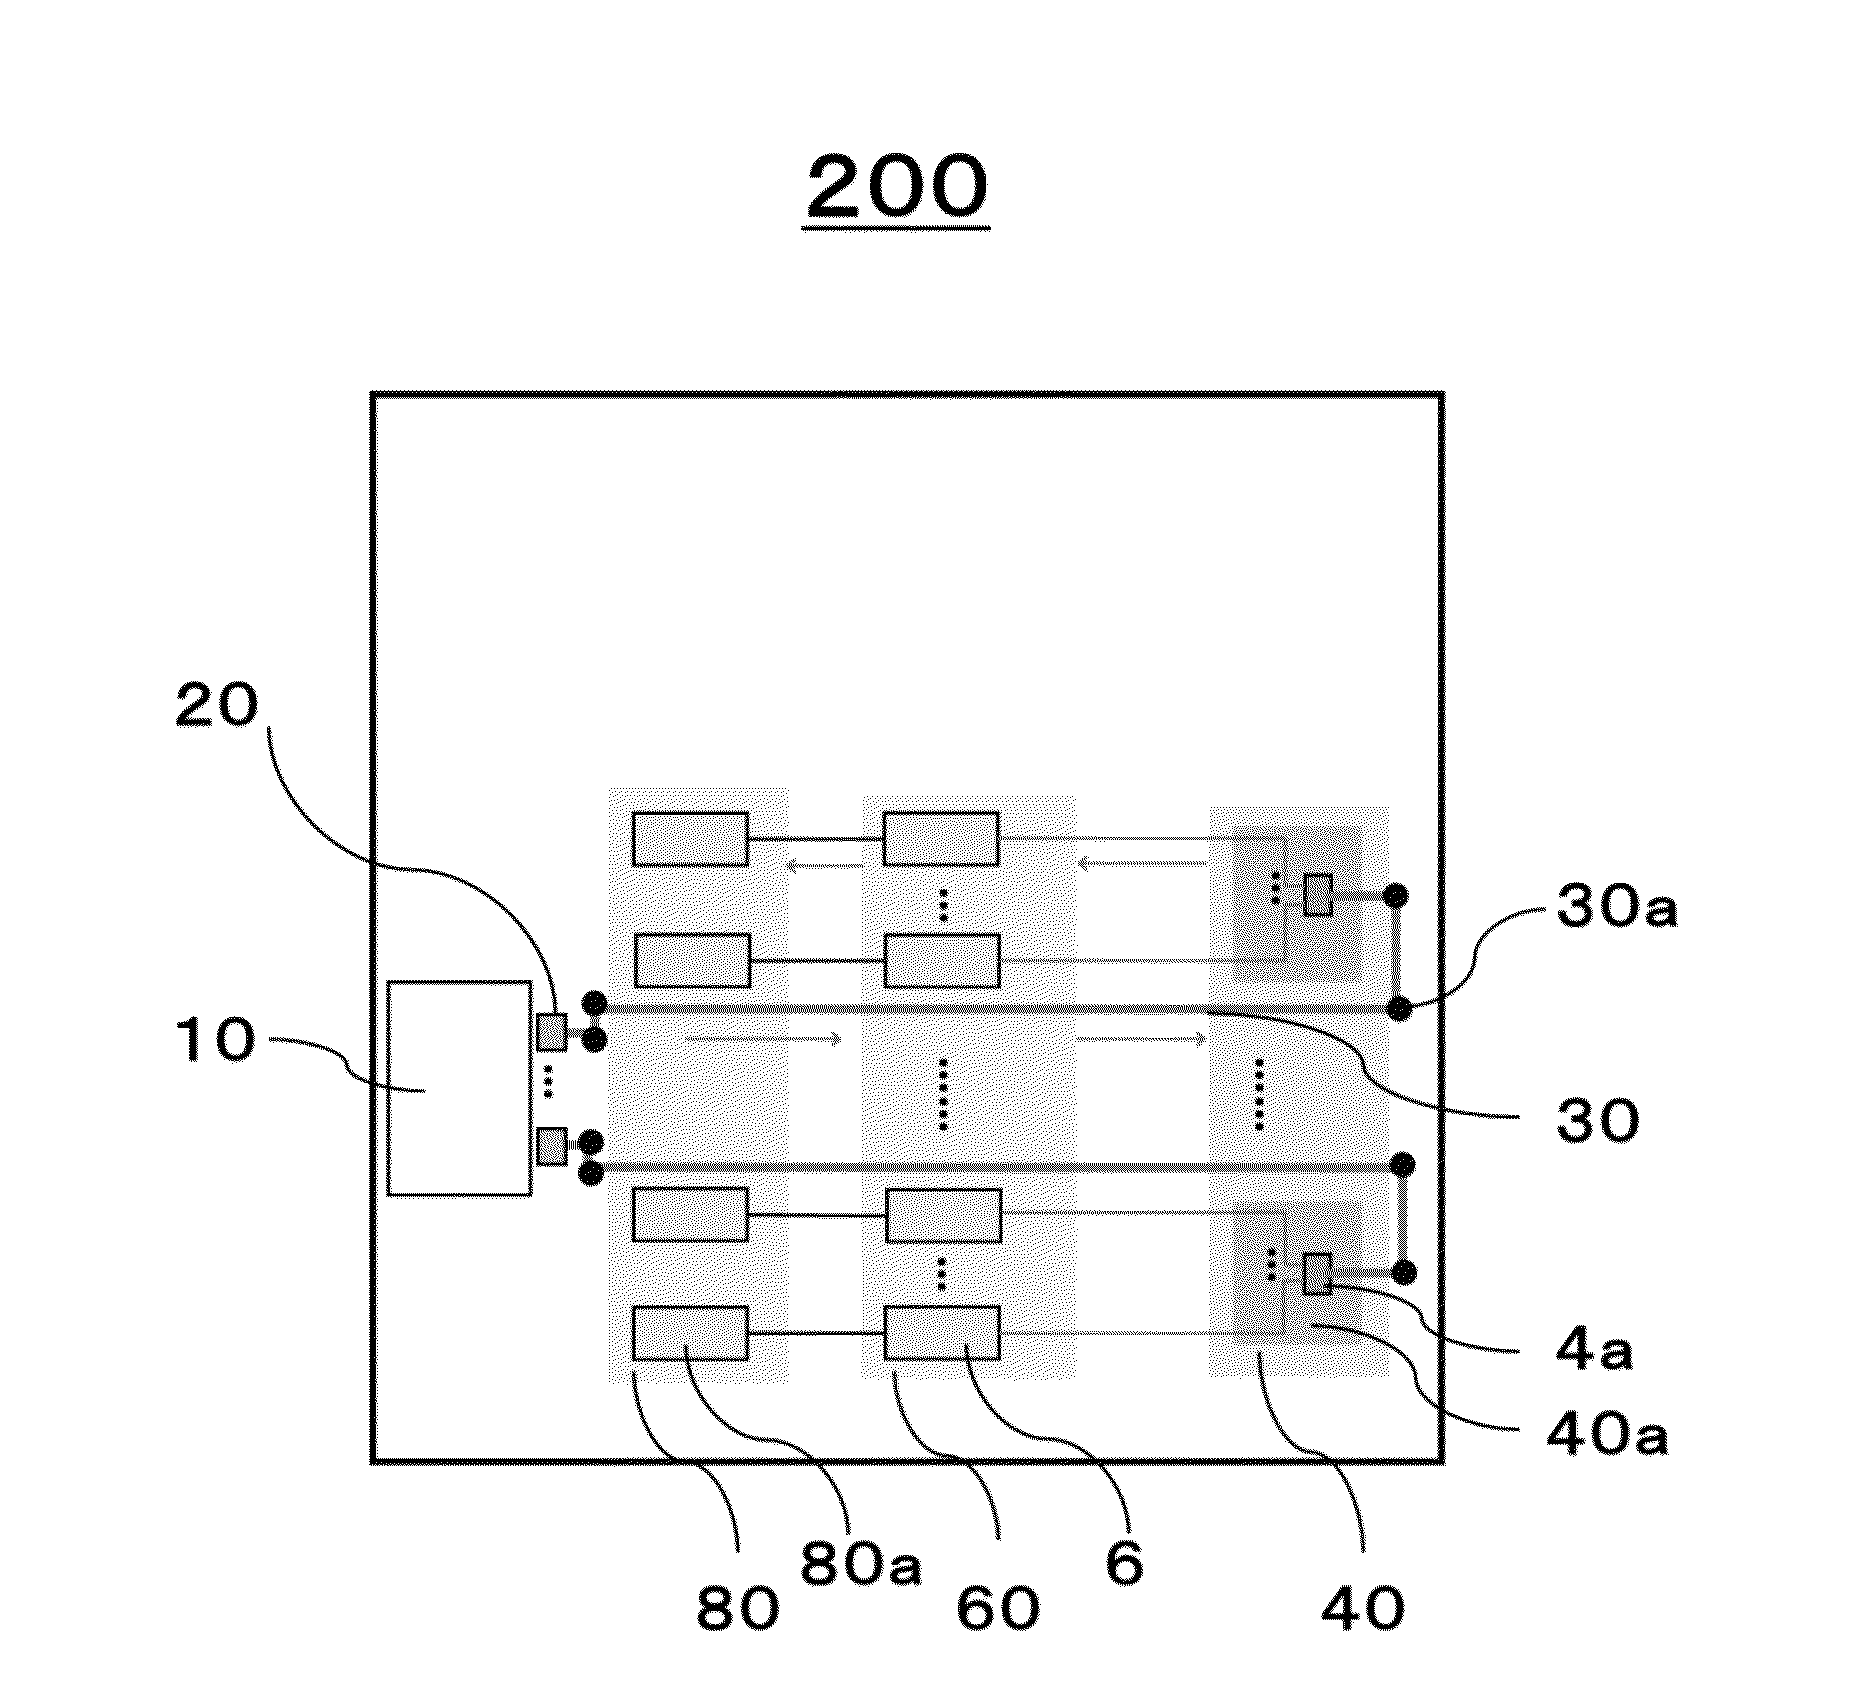 Optical transmitter or transmission unit in optical transmitter/receiver provided on opto-electric hybrid board